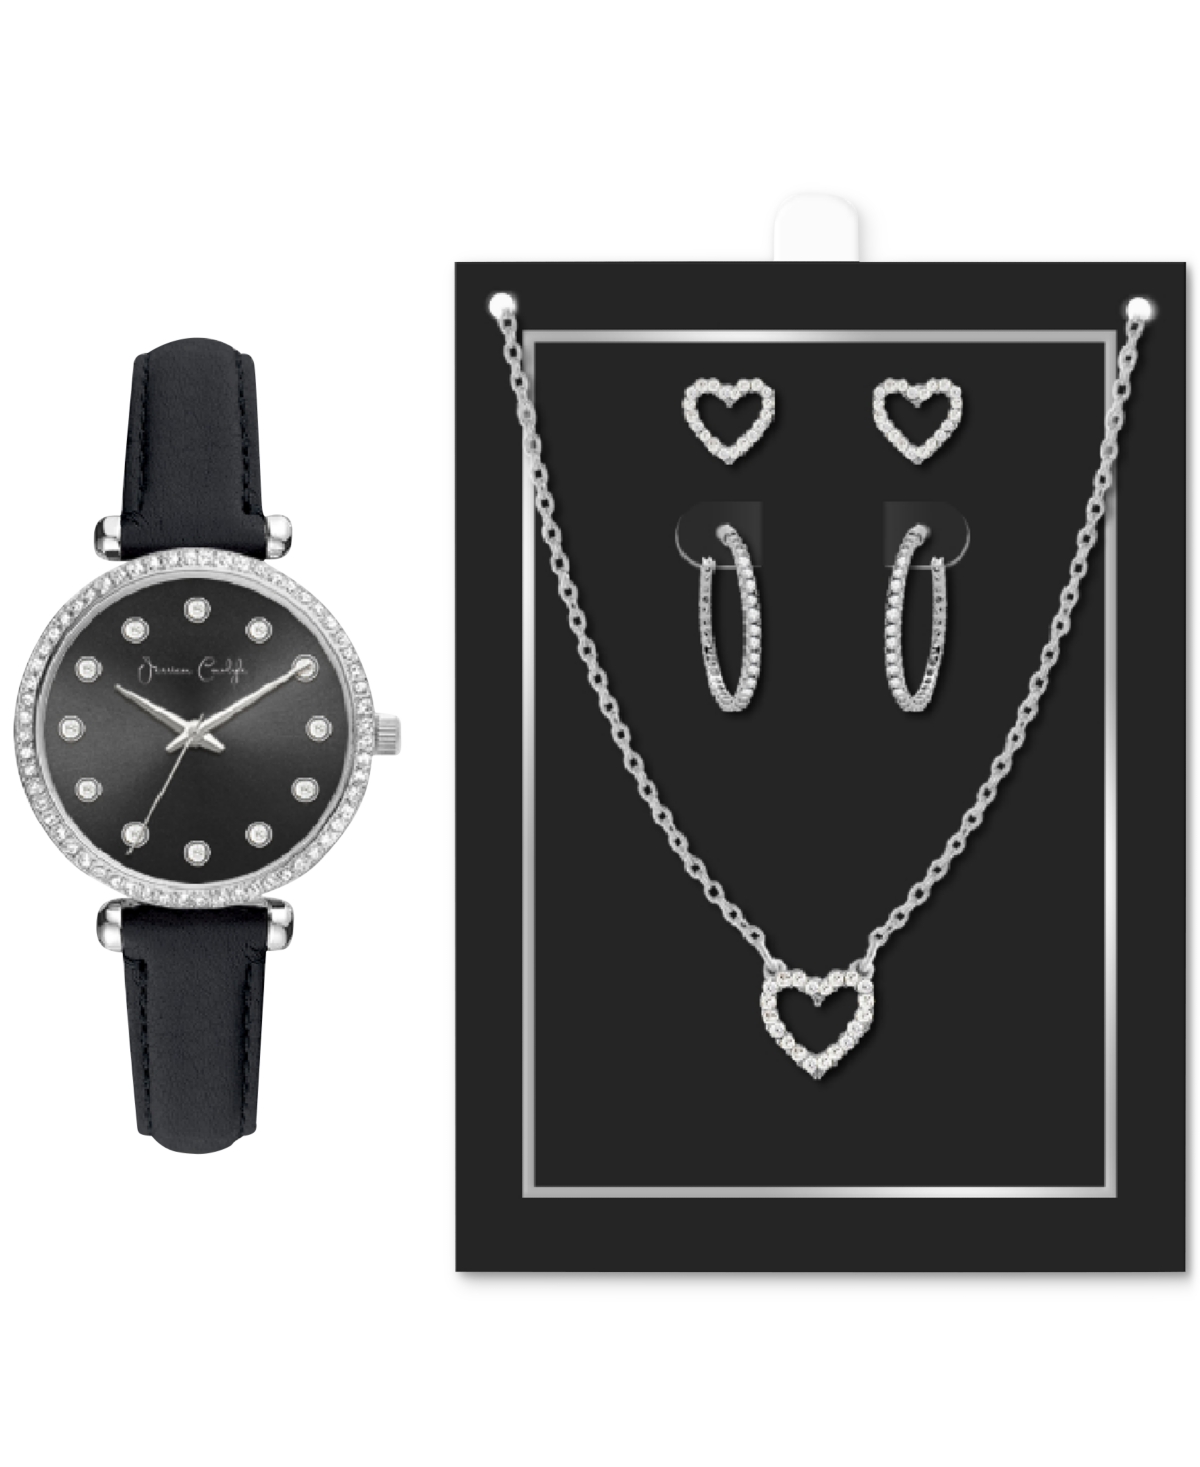 Jessica Carlyle Women's Black Strap Watch 33mm Jewelry Gift Set In Silver